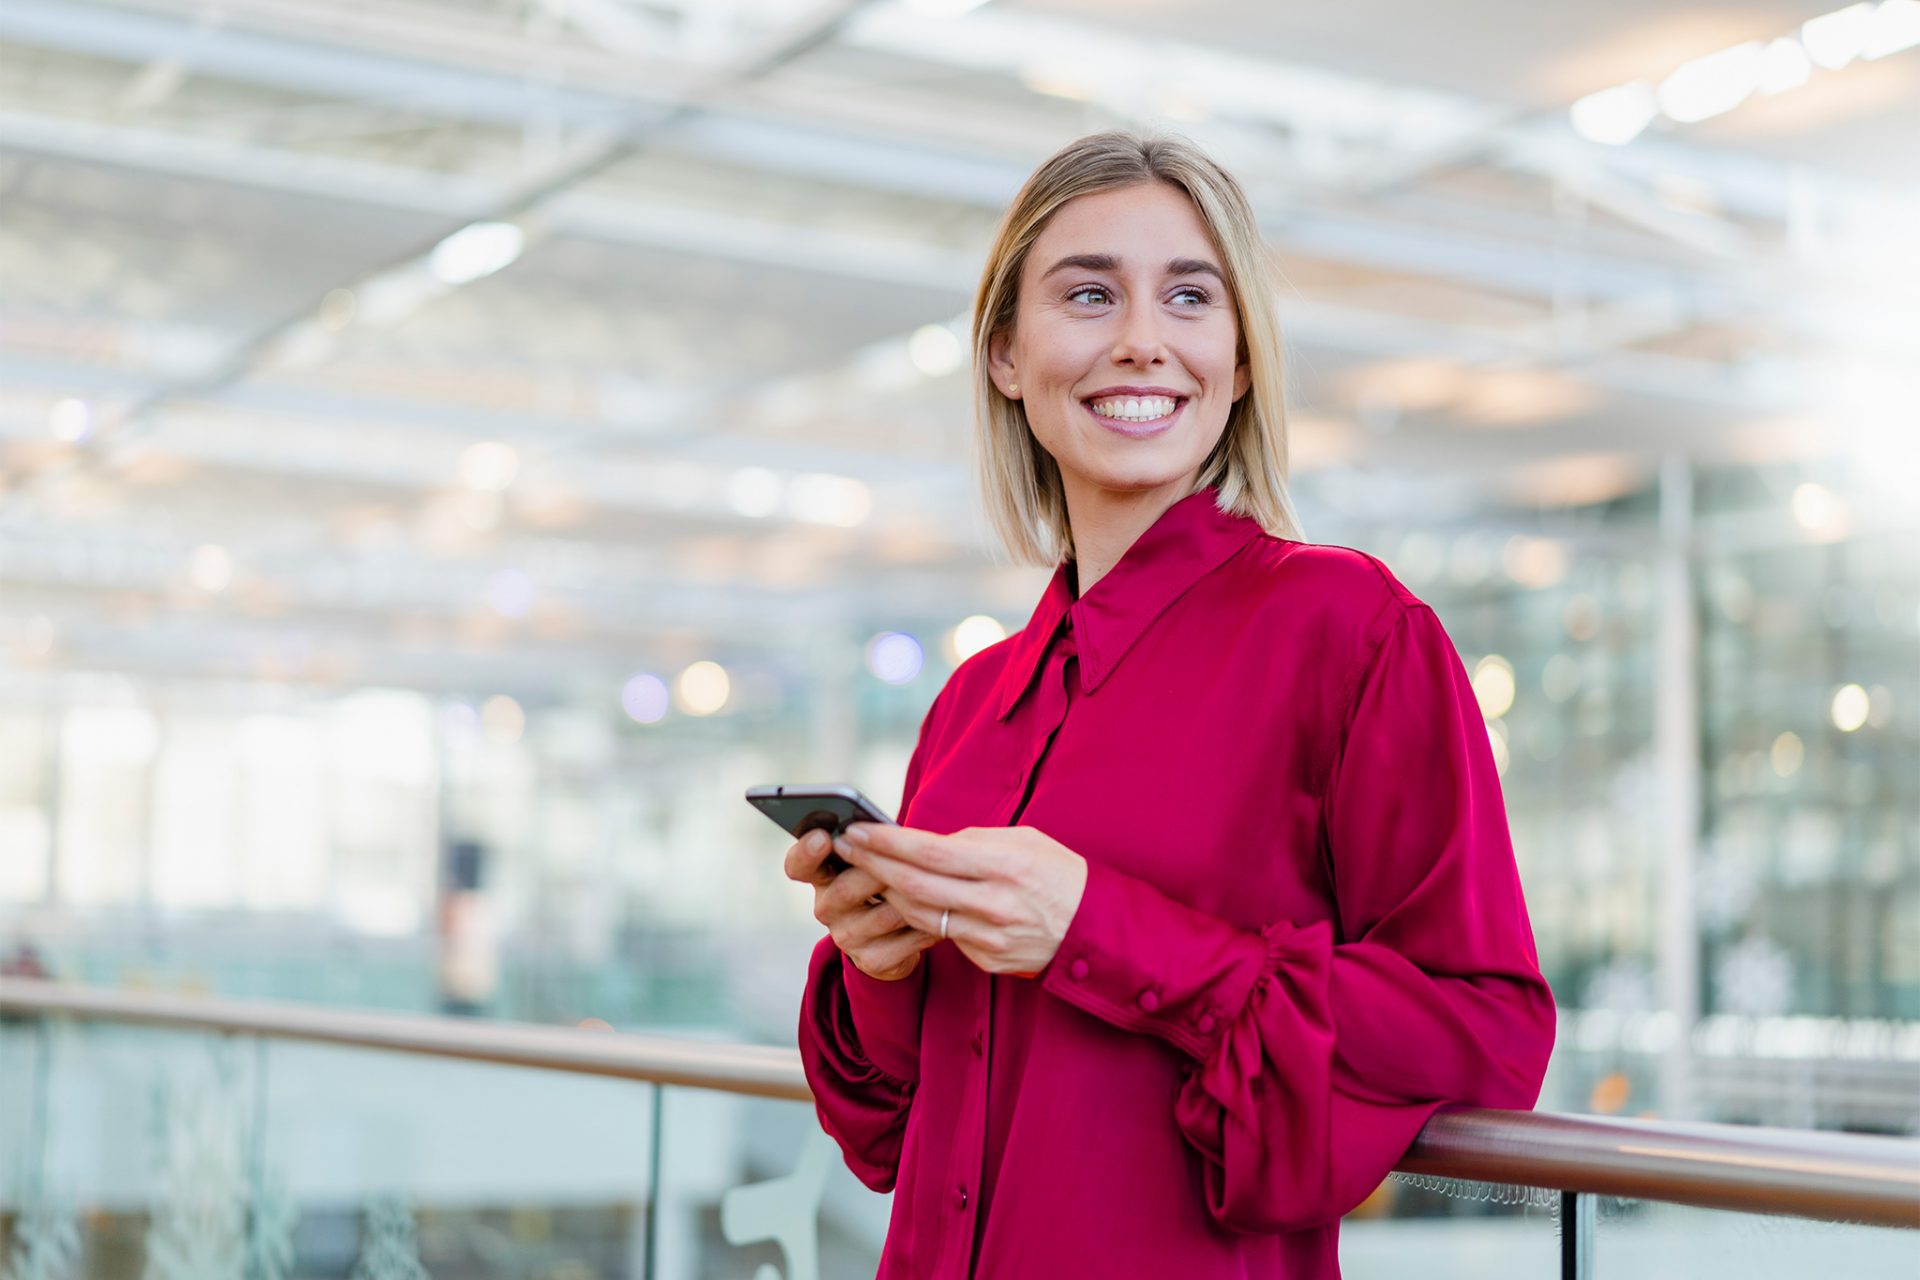 woman-in-red-with-phone-smiling